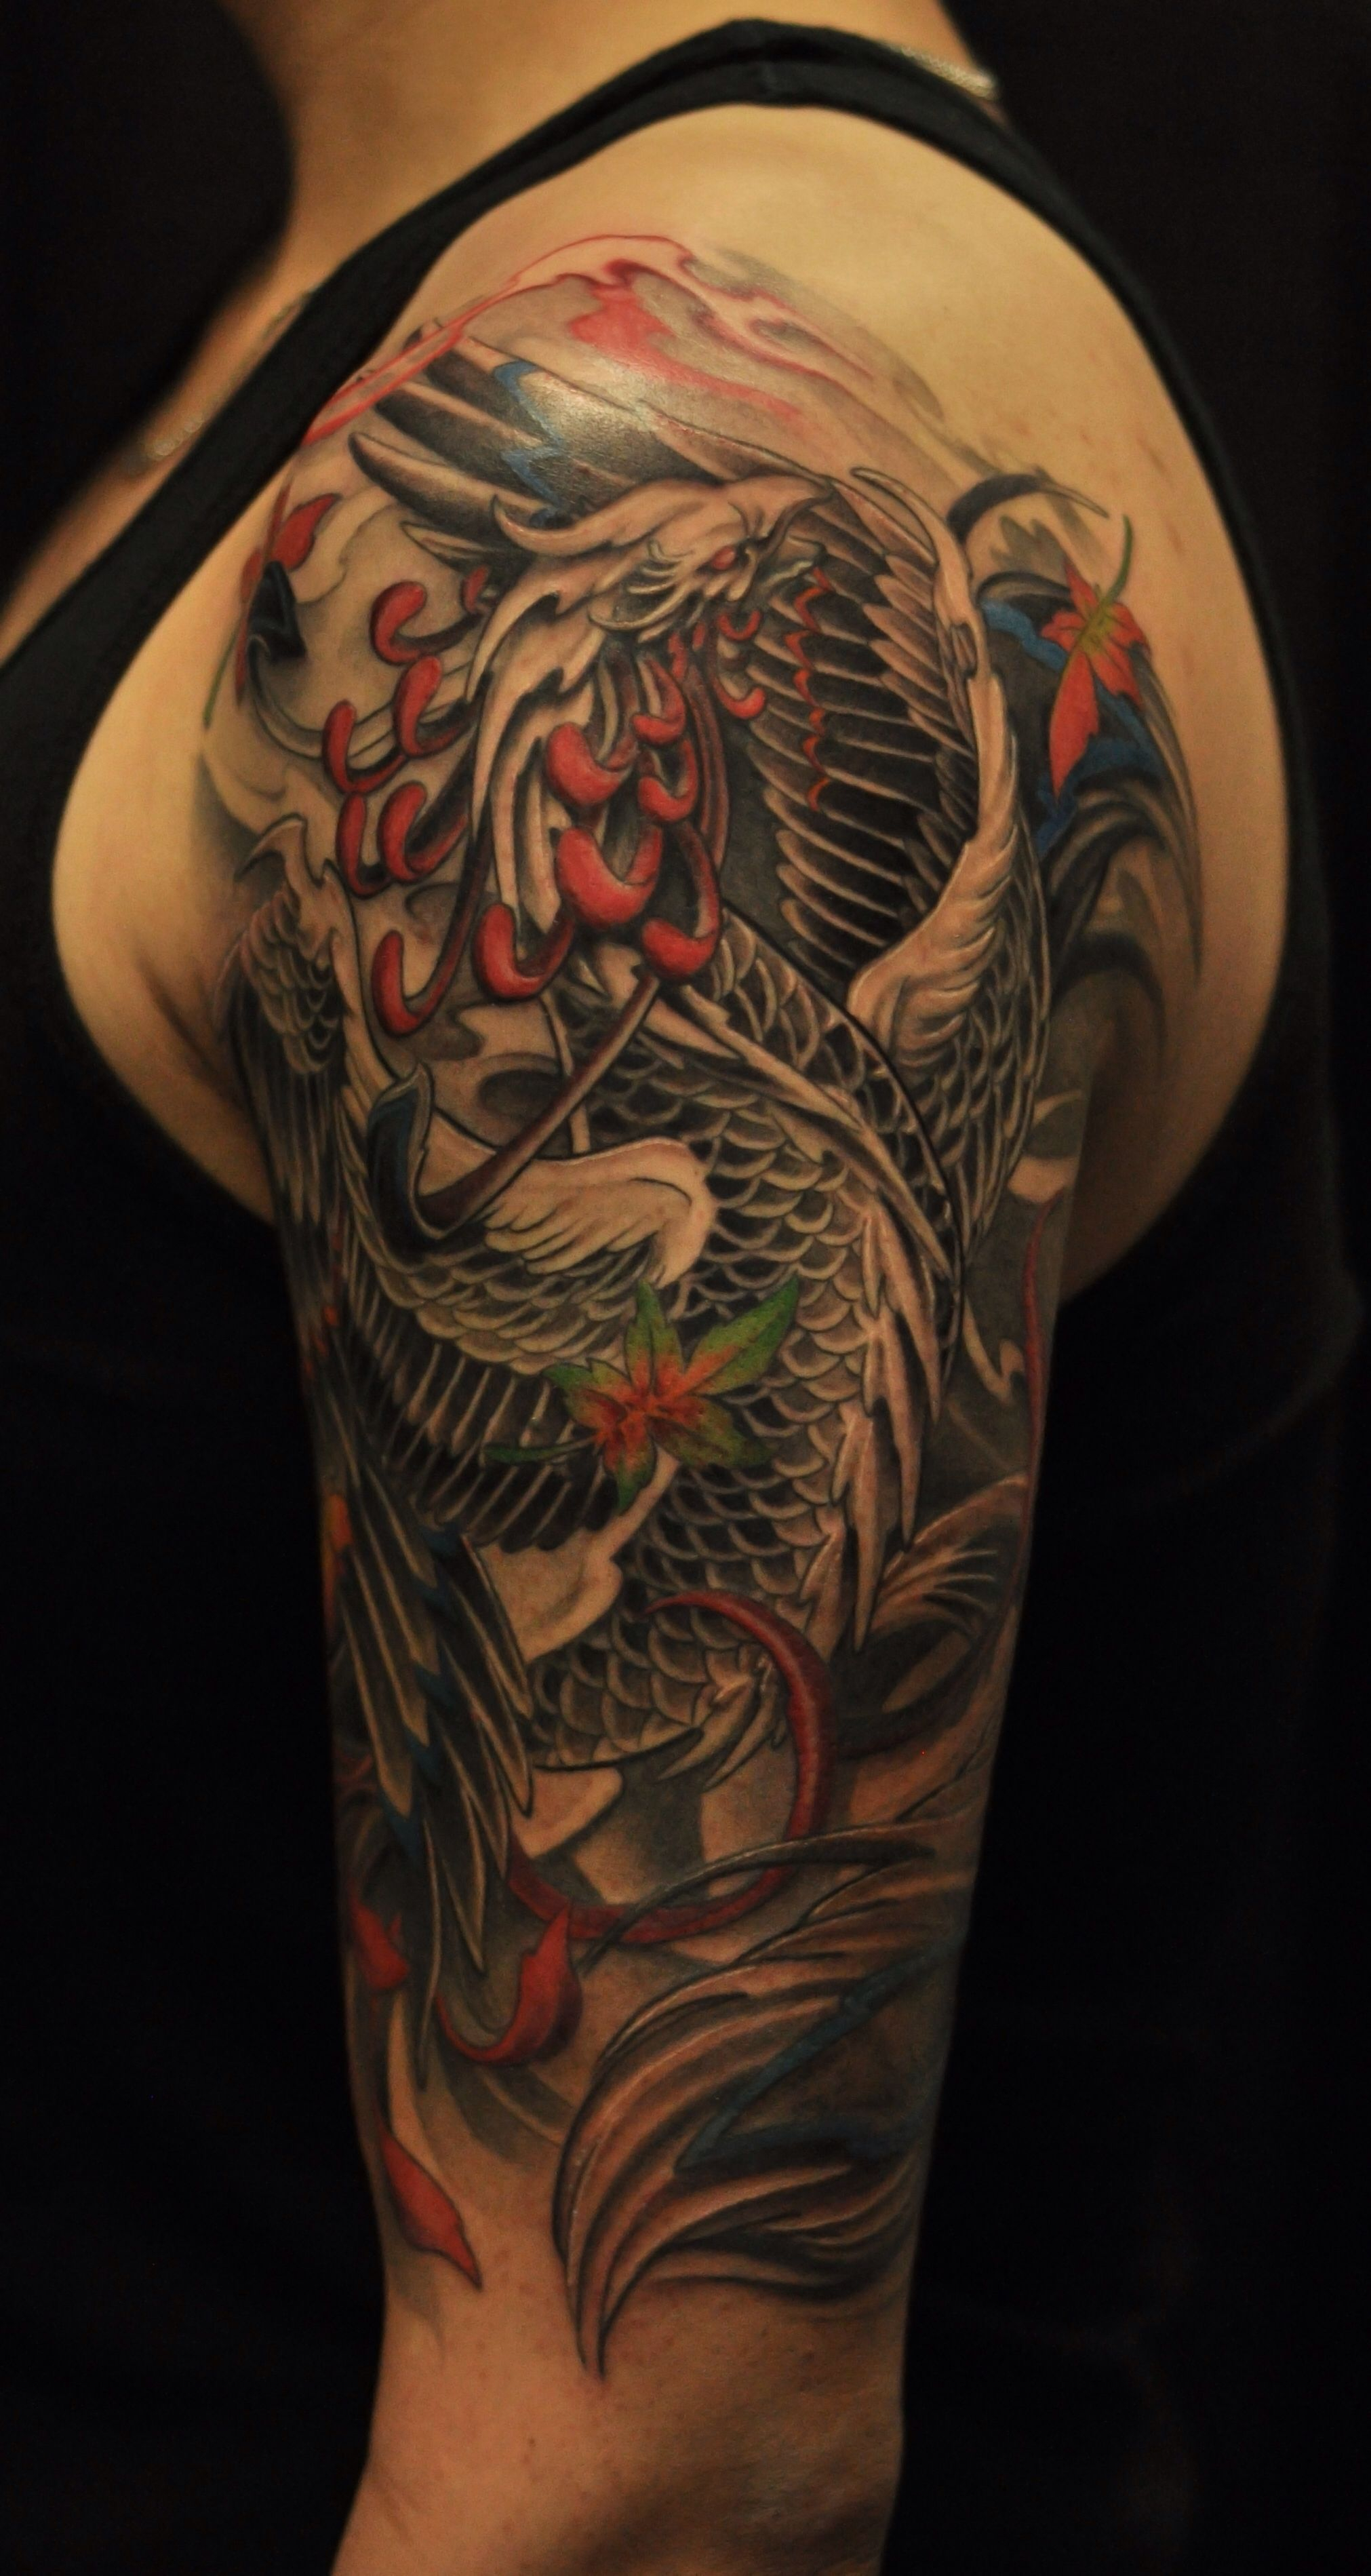 This Is One Of The Coolest Phoenix Tattoos Ive Seen Tattoo for dimensions 2022 X 3798